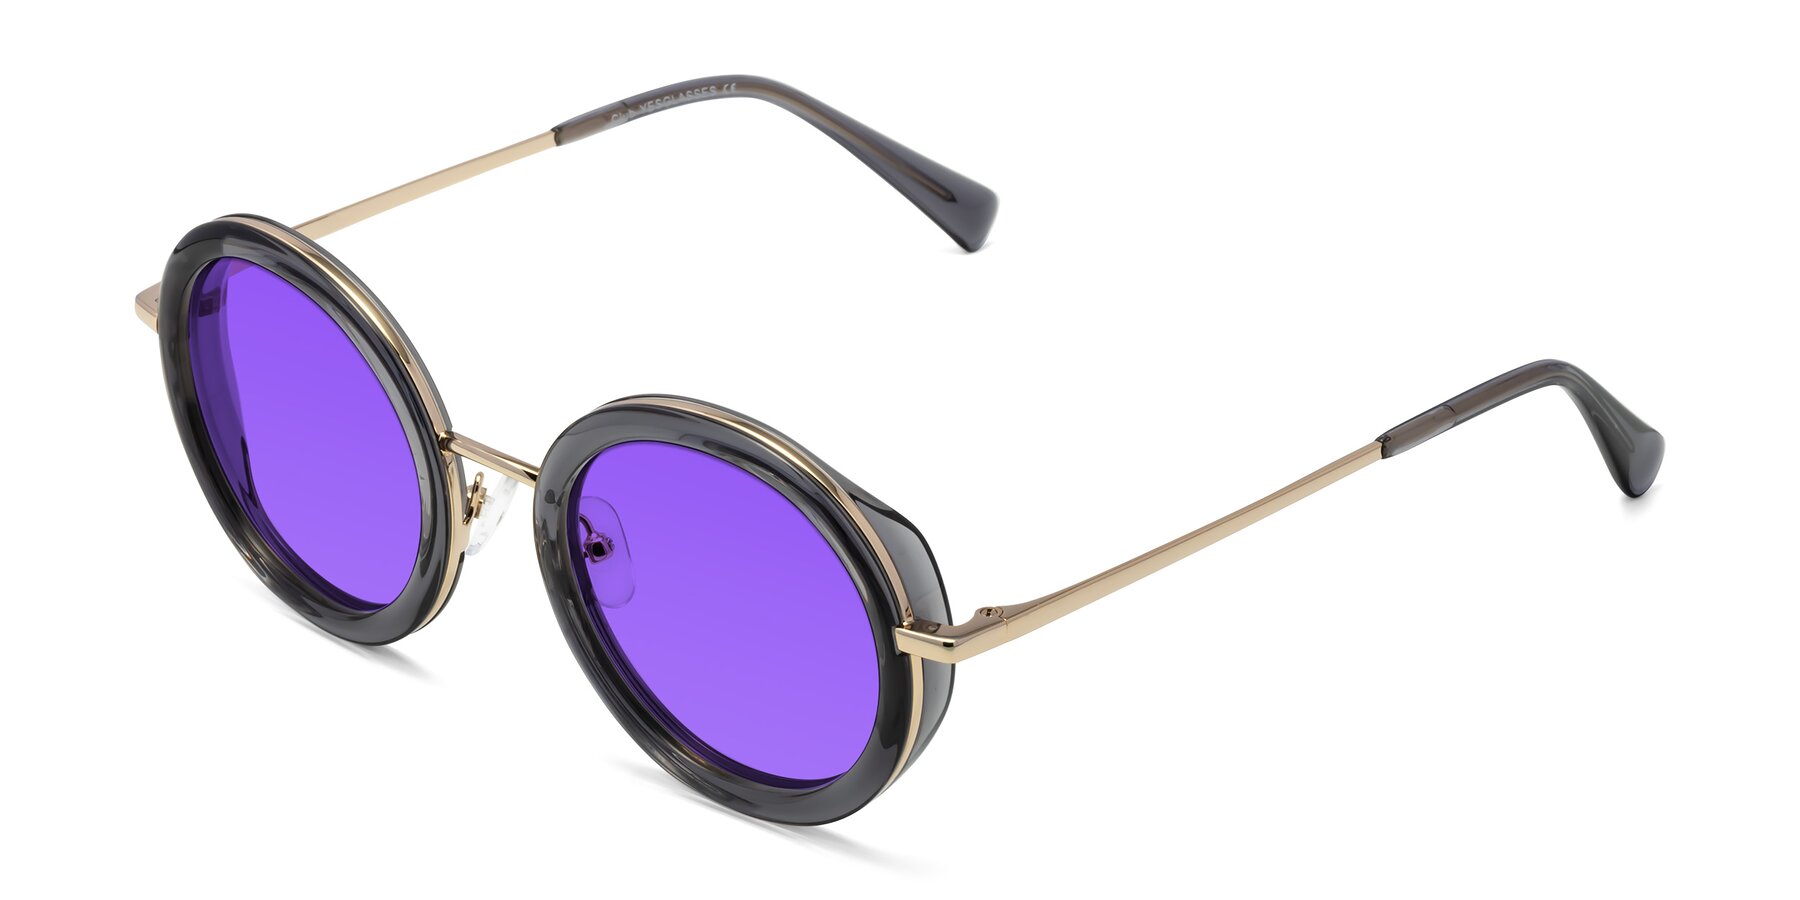 Angle of Club in Gray-Gold with Purple Tinted Lenses